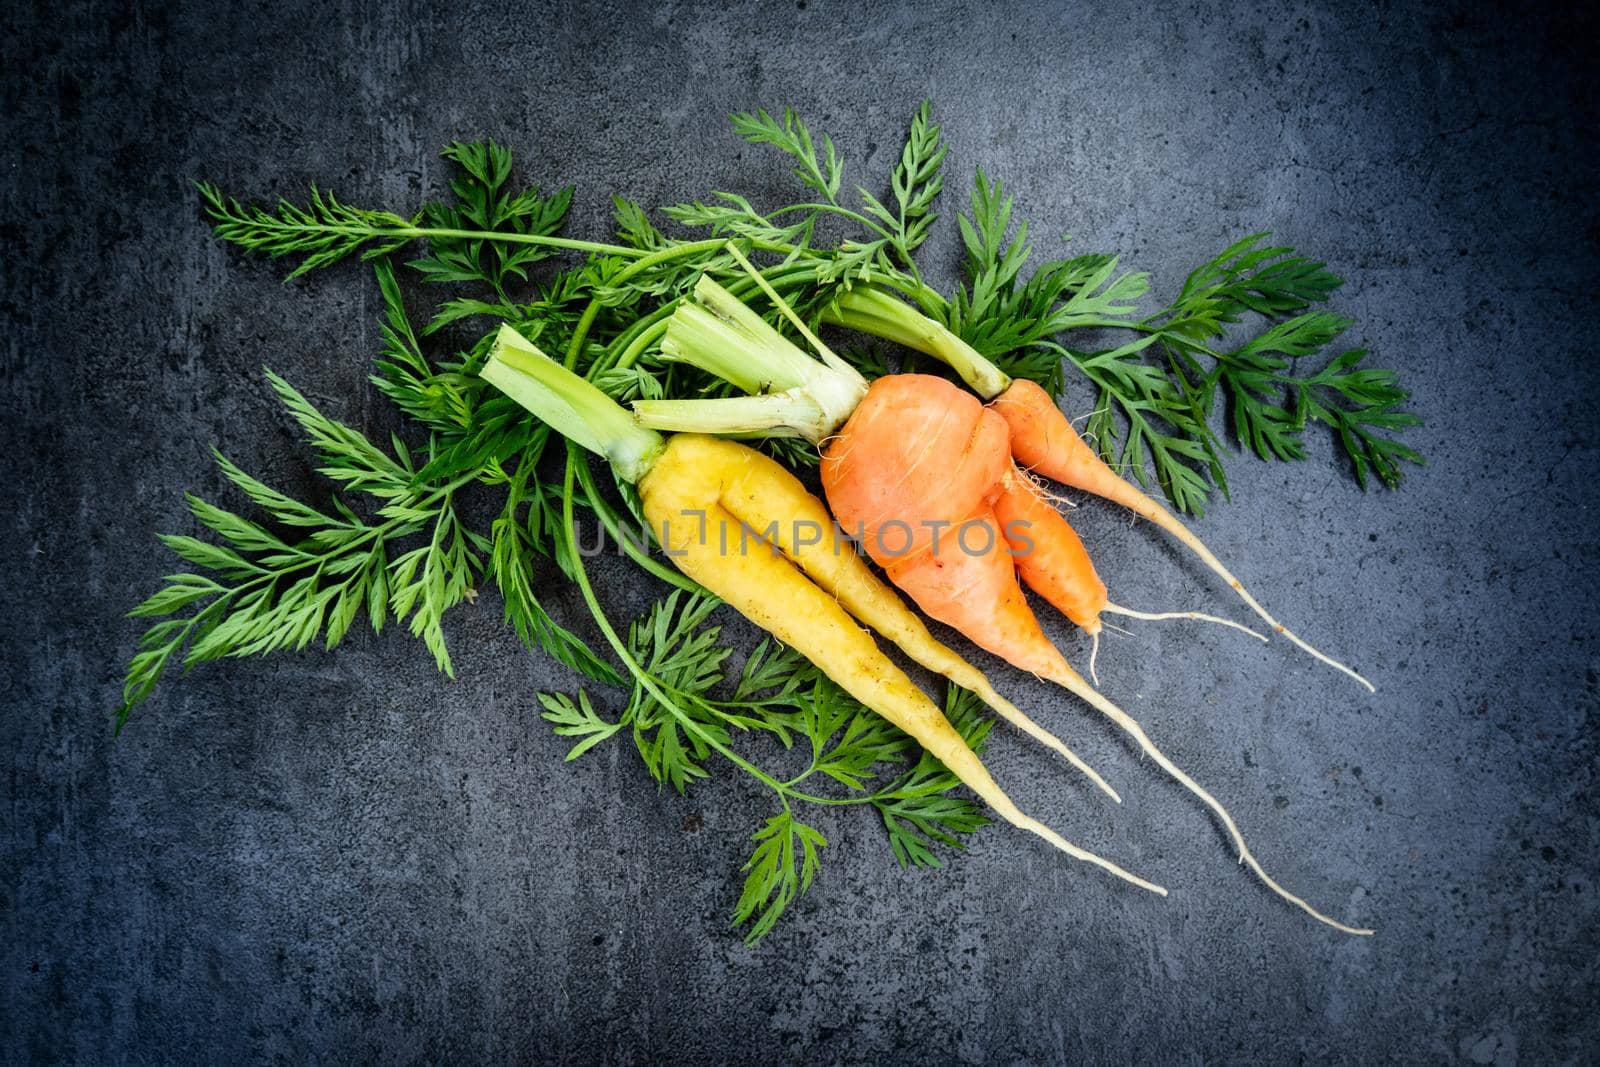 Carrots with leaves over dark by Tilo